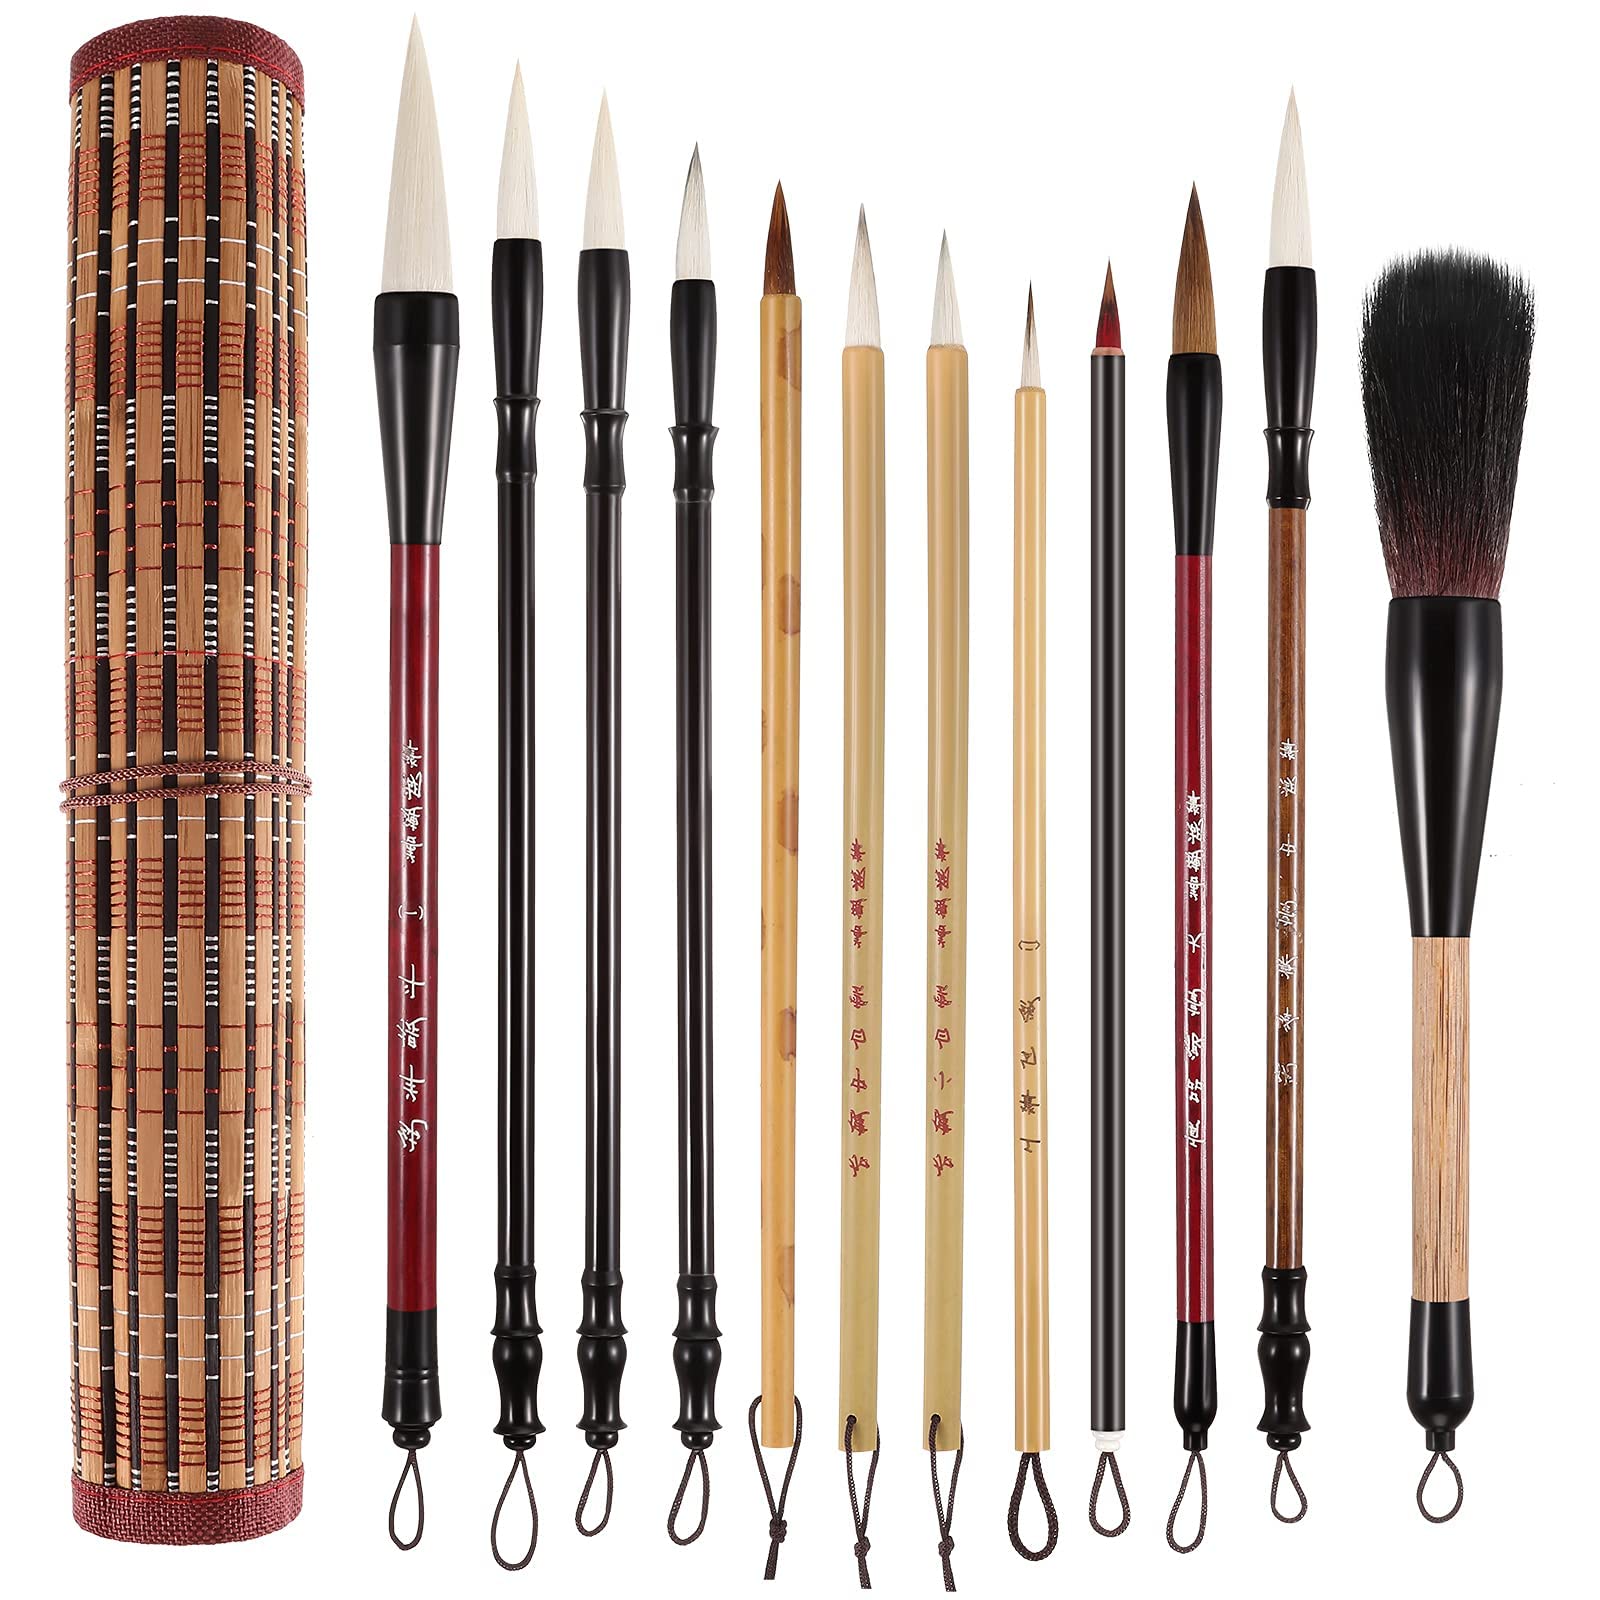 12 Pieces Chinese Calligraphy Brushes Painting Writing Brushes